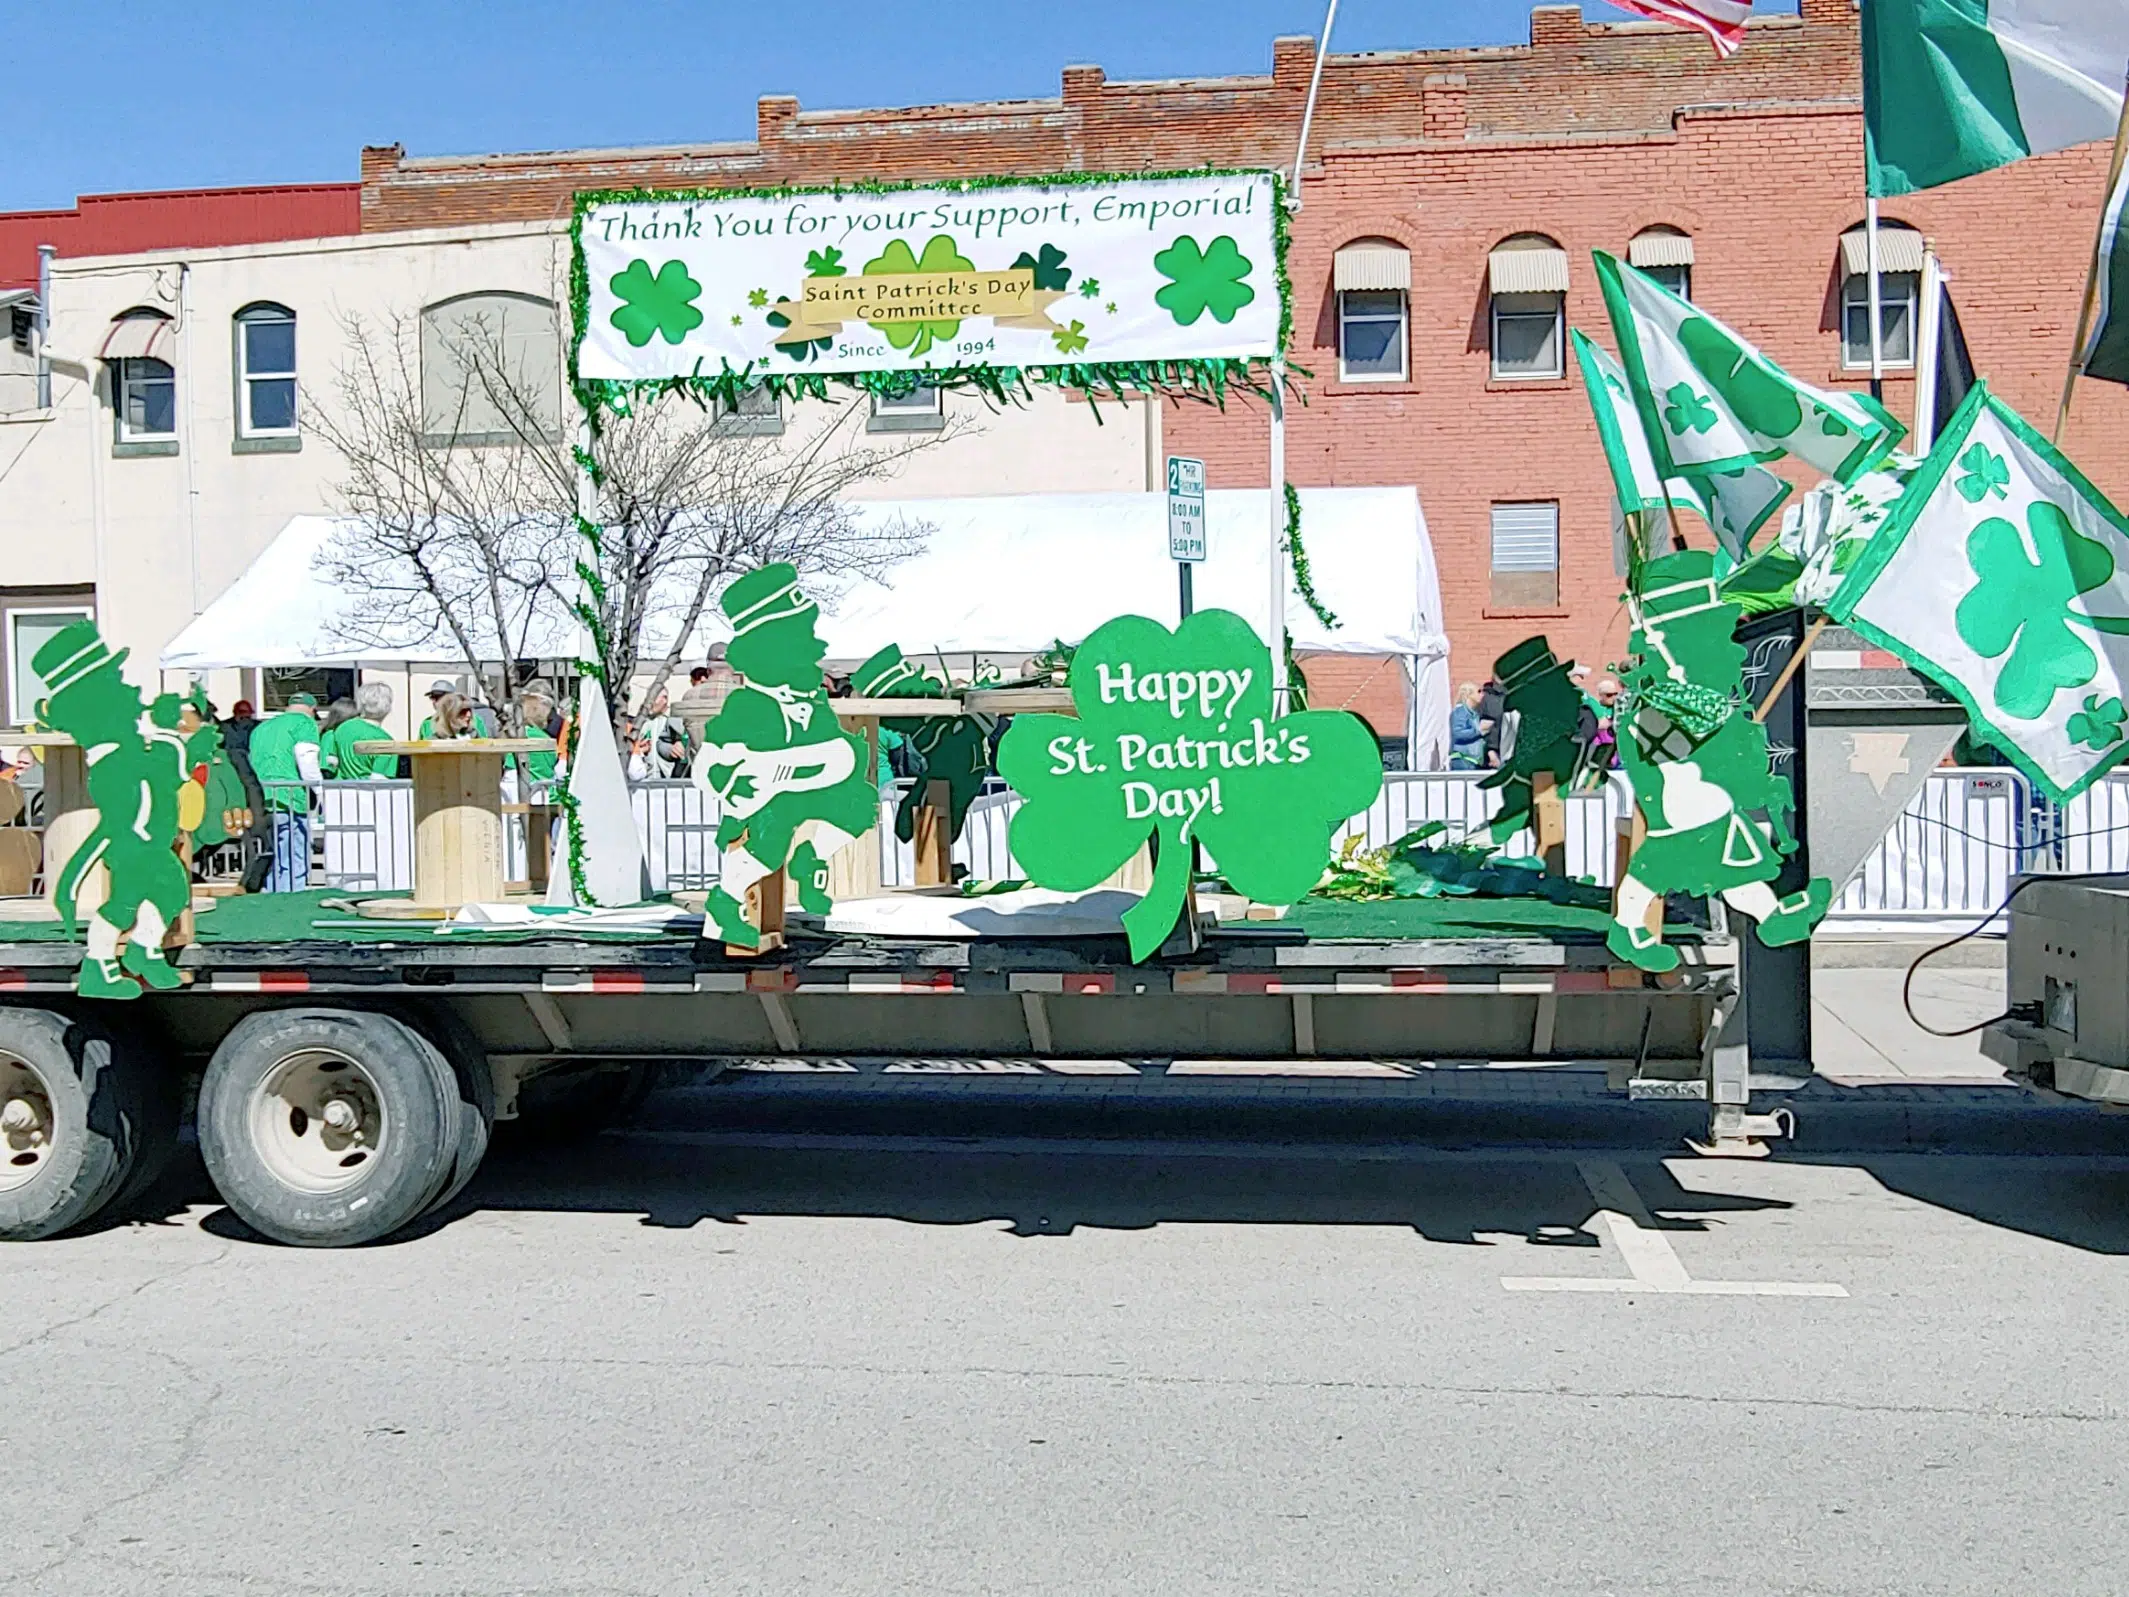 Emporia St. Patrick's Day Committee